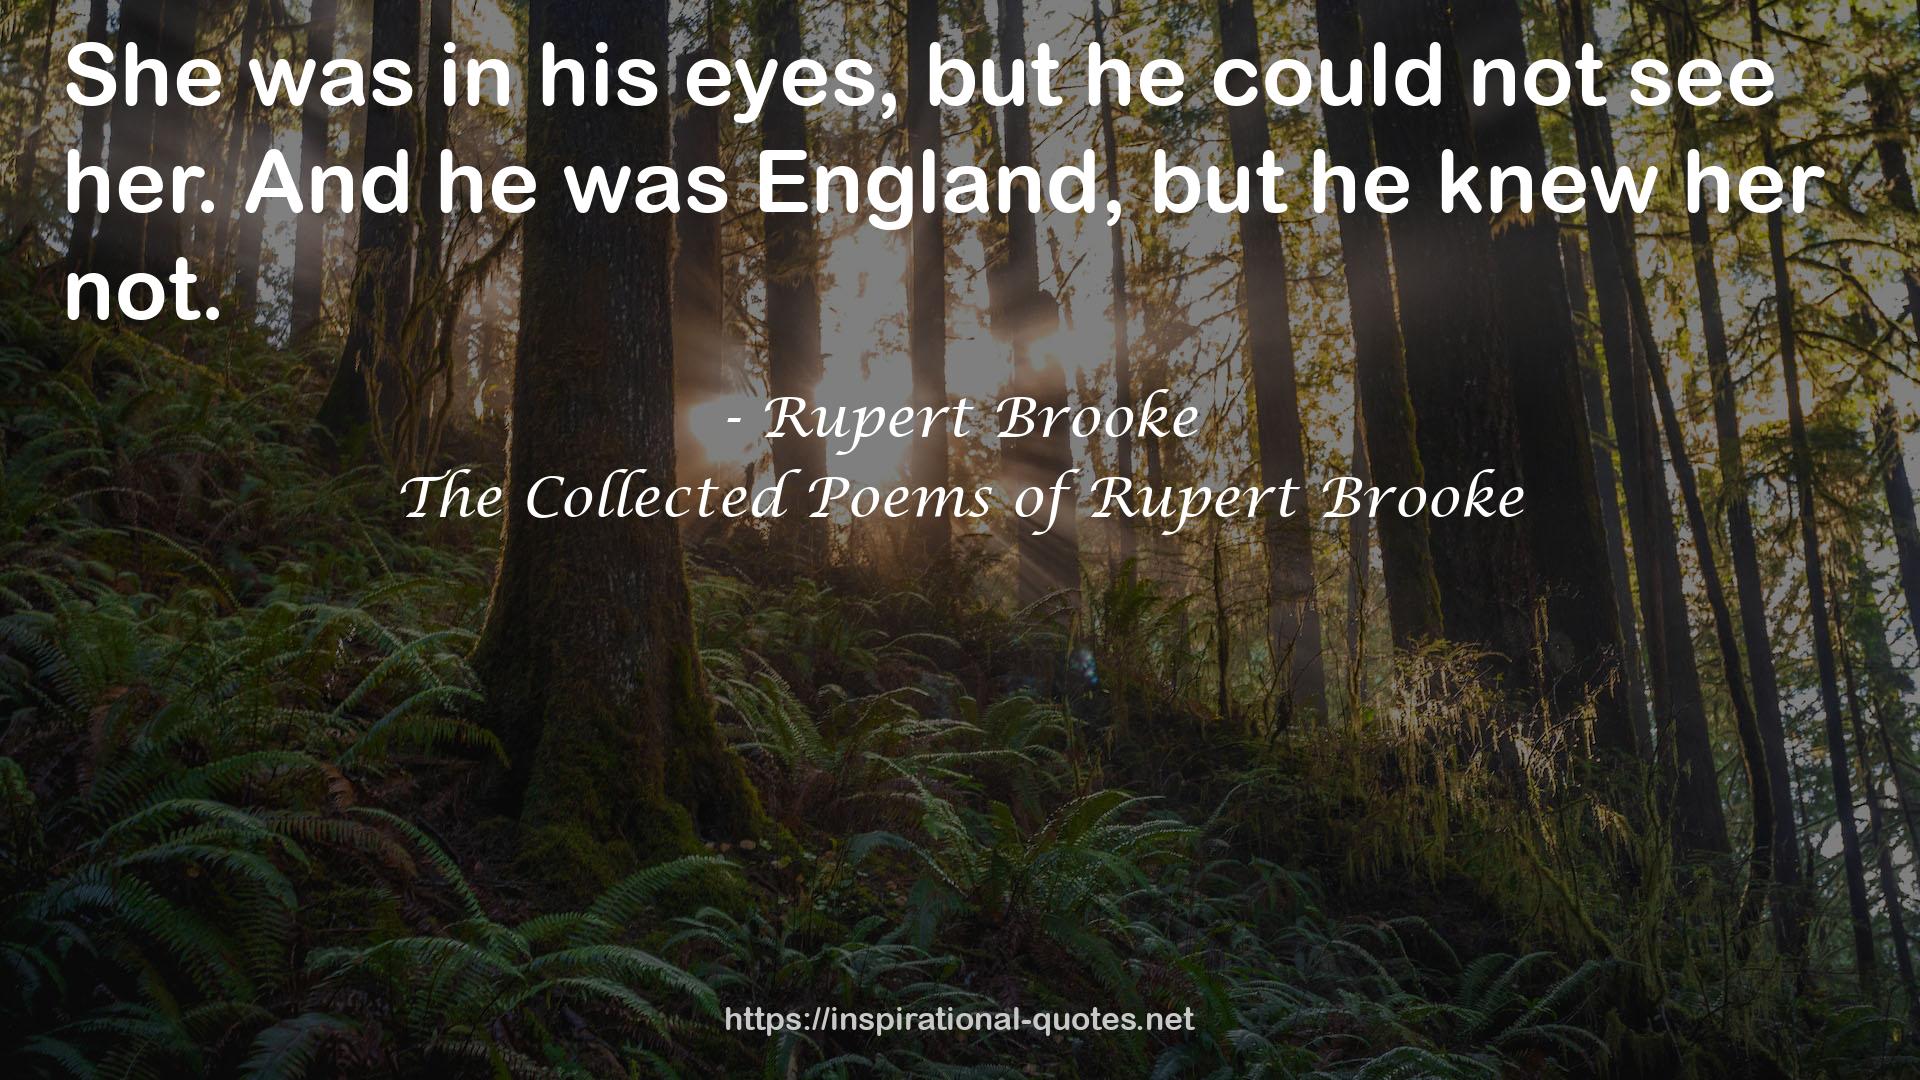 The Collected Poems of Rupert Brooke QUOTES